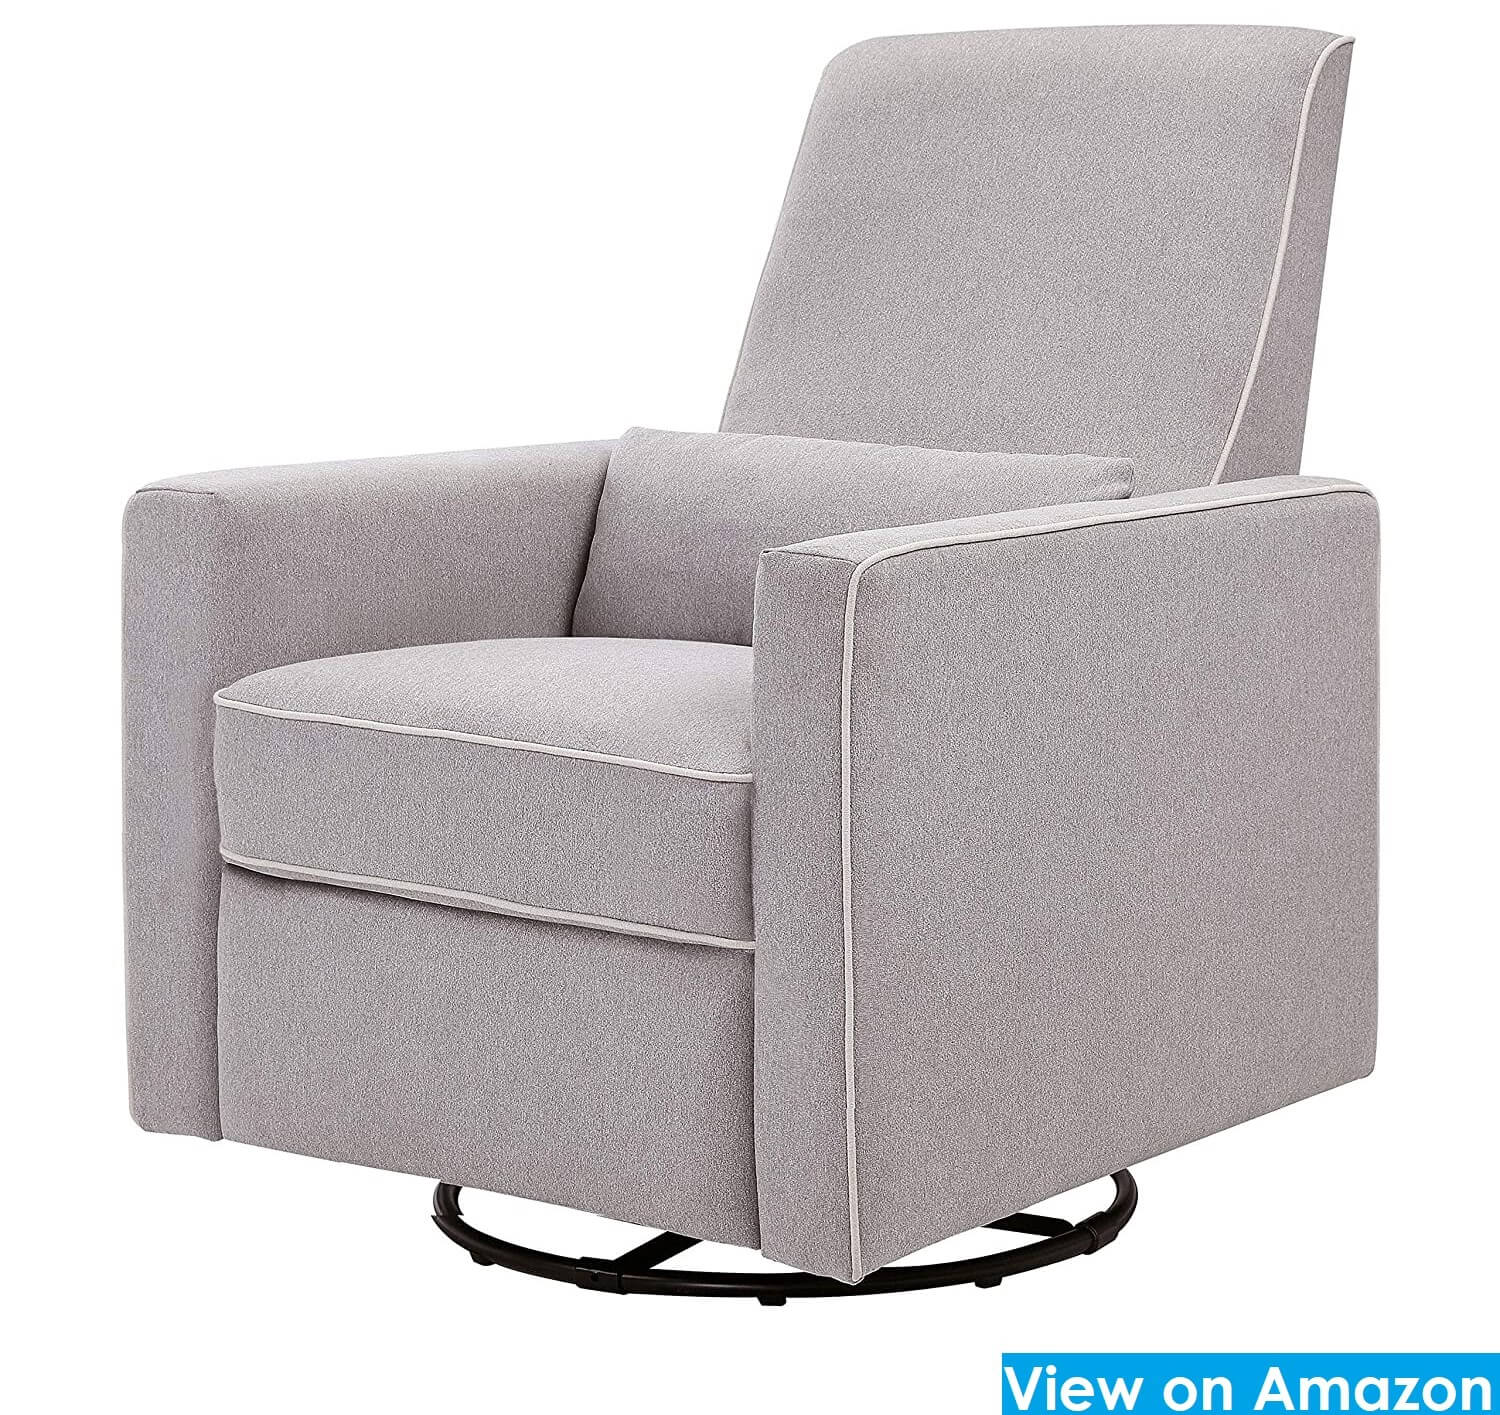 DaVinci Piper Upholstered Recliner and Swivel Glider